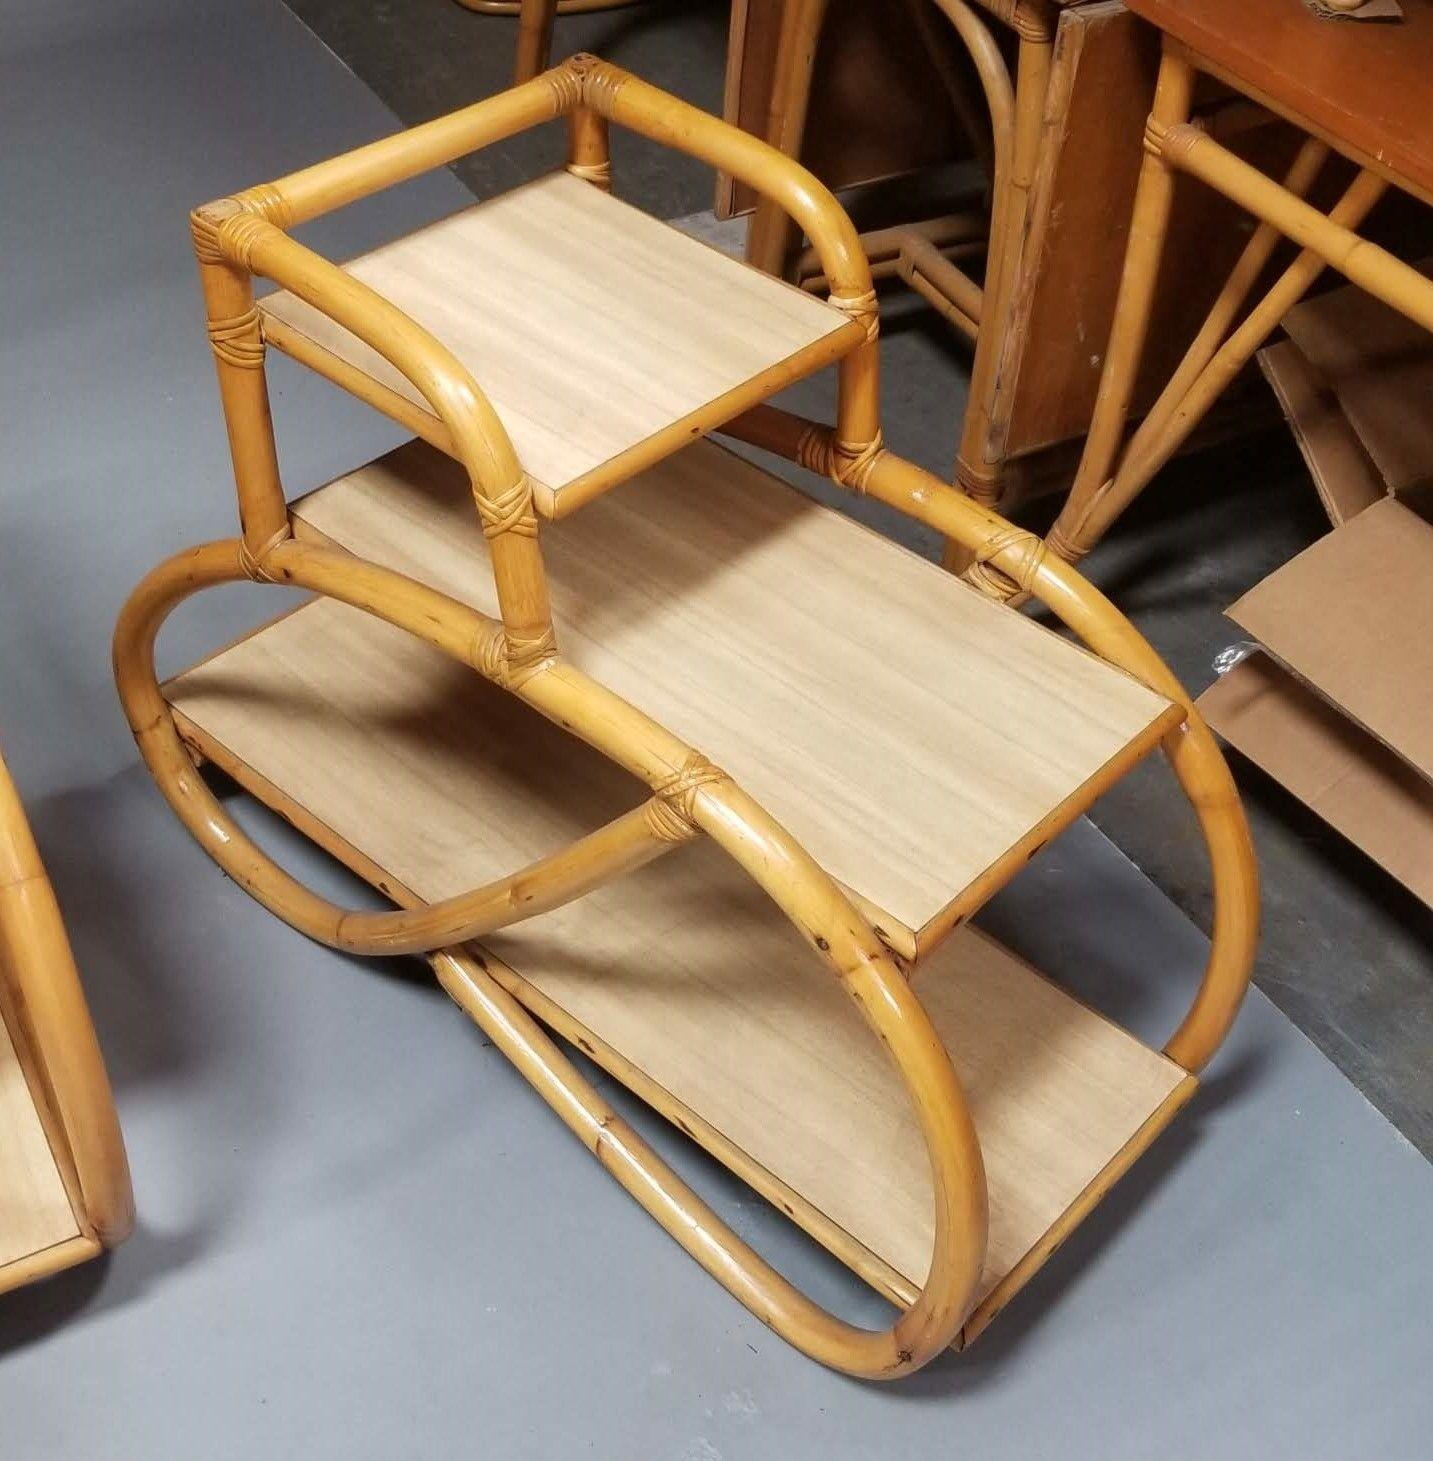 Restored Rattan Side Tables 3-Tier 3/4 Pretzel Arms w/ Formica Top In Excellent Condition For Sale In Van Nuys, CA